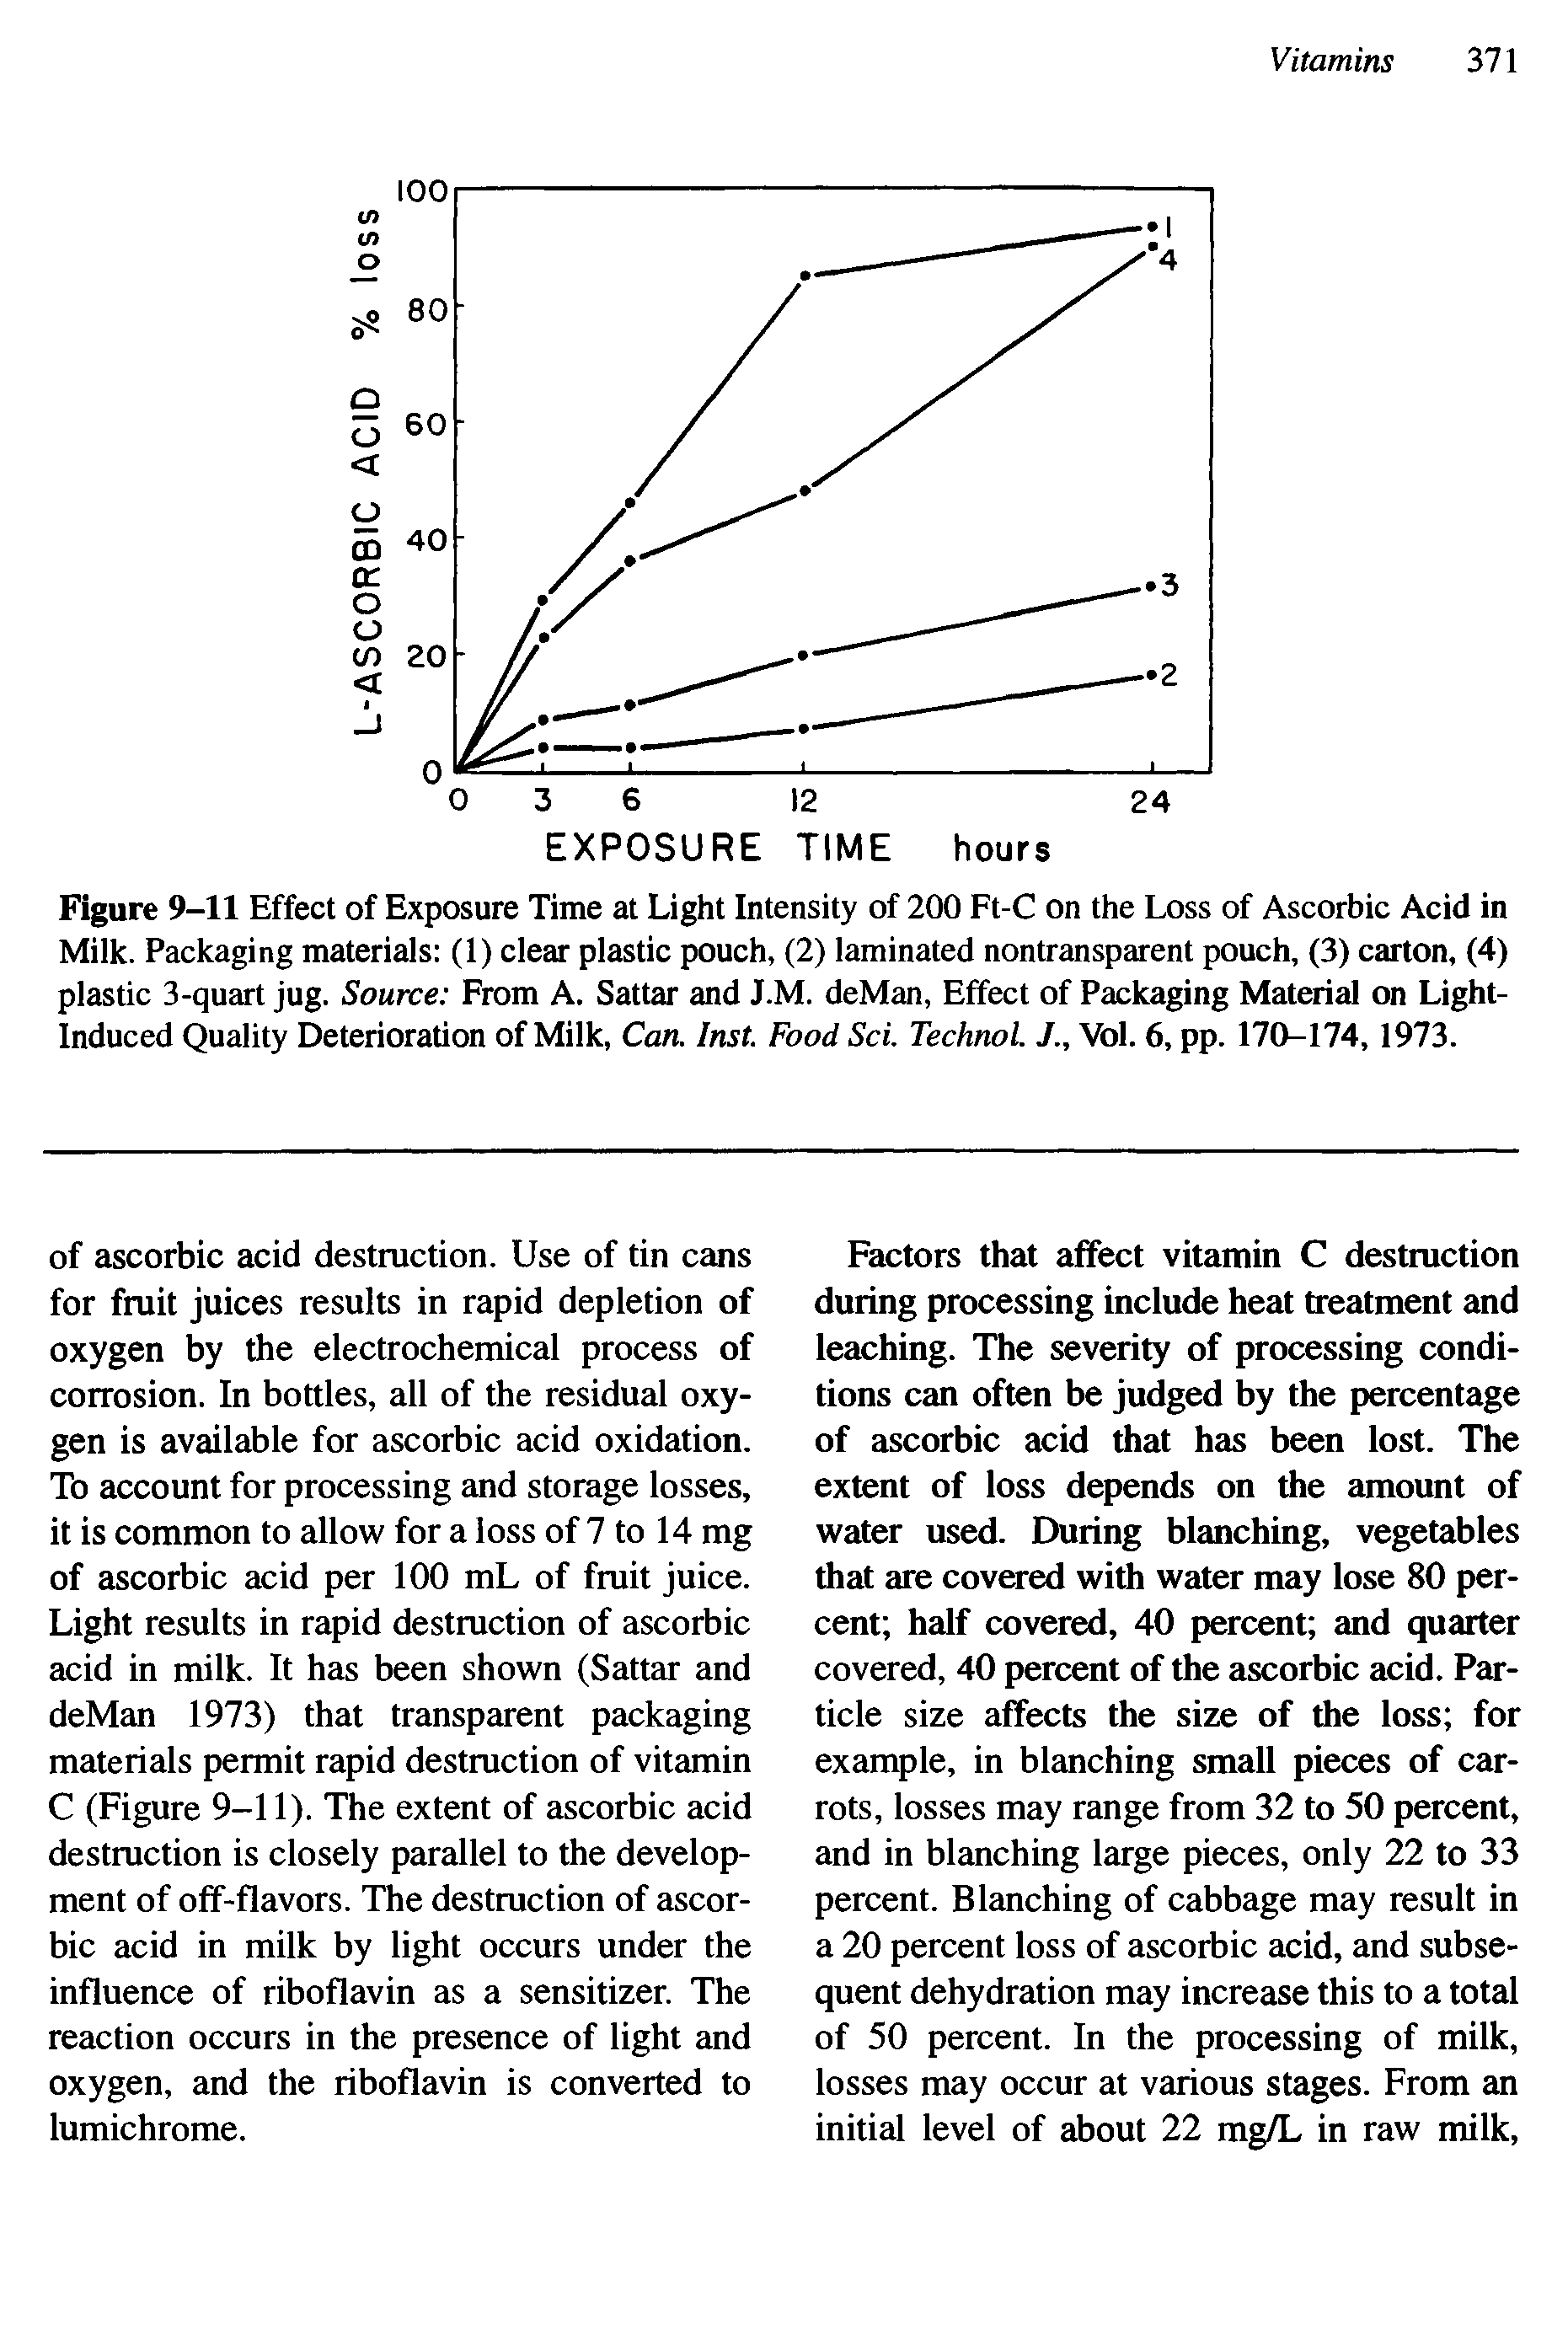 Figure 9-11 Effect of Exposure Time at Light Intensity of 200 Ft-C on the Loss of Ascorbic Acid in Milk. Packaging materials (1) clear plastic pouch, (2) laminated nontransparent pouch, (3) carton, (4) plastic 3-quart jug. Source From A. Sattar and J.M. deMan, Effect of Packaging Material on Light-Induced Quality Deterioration of Milk, Can. Inst. Food Sci. Technol. J., Vol. 6, pp. 170-174,1973.